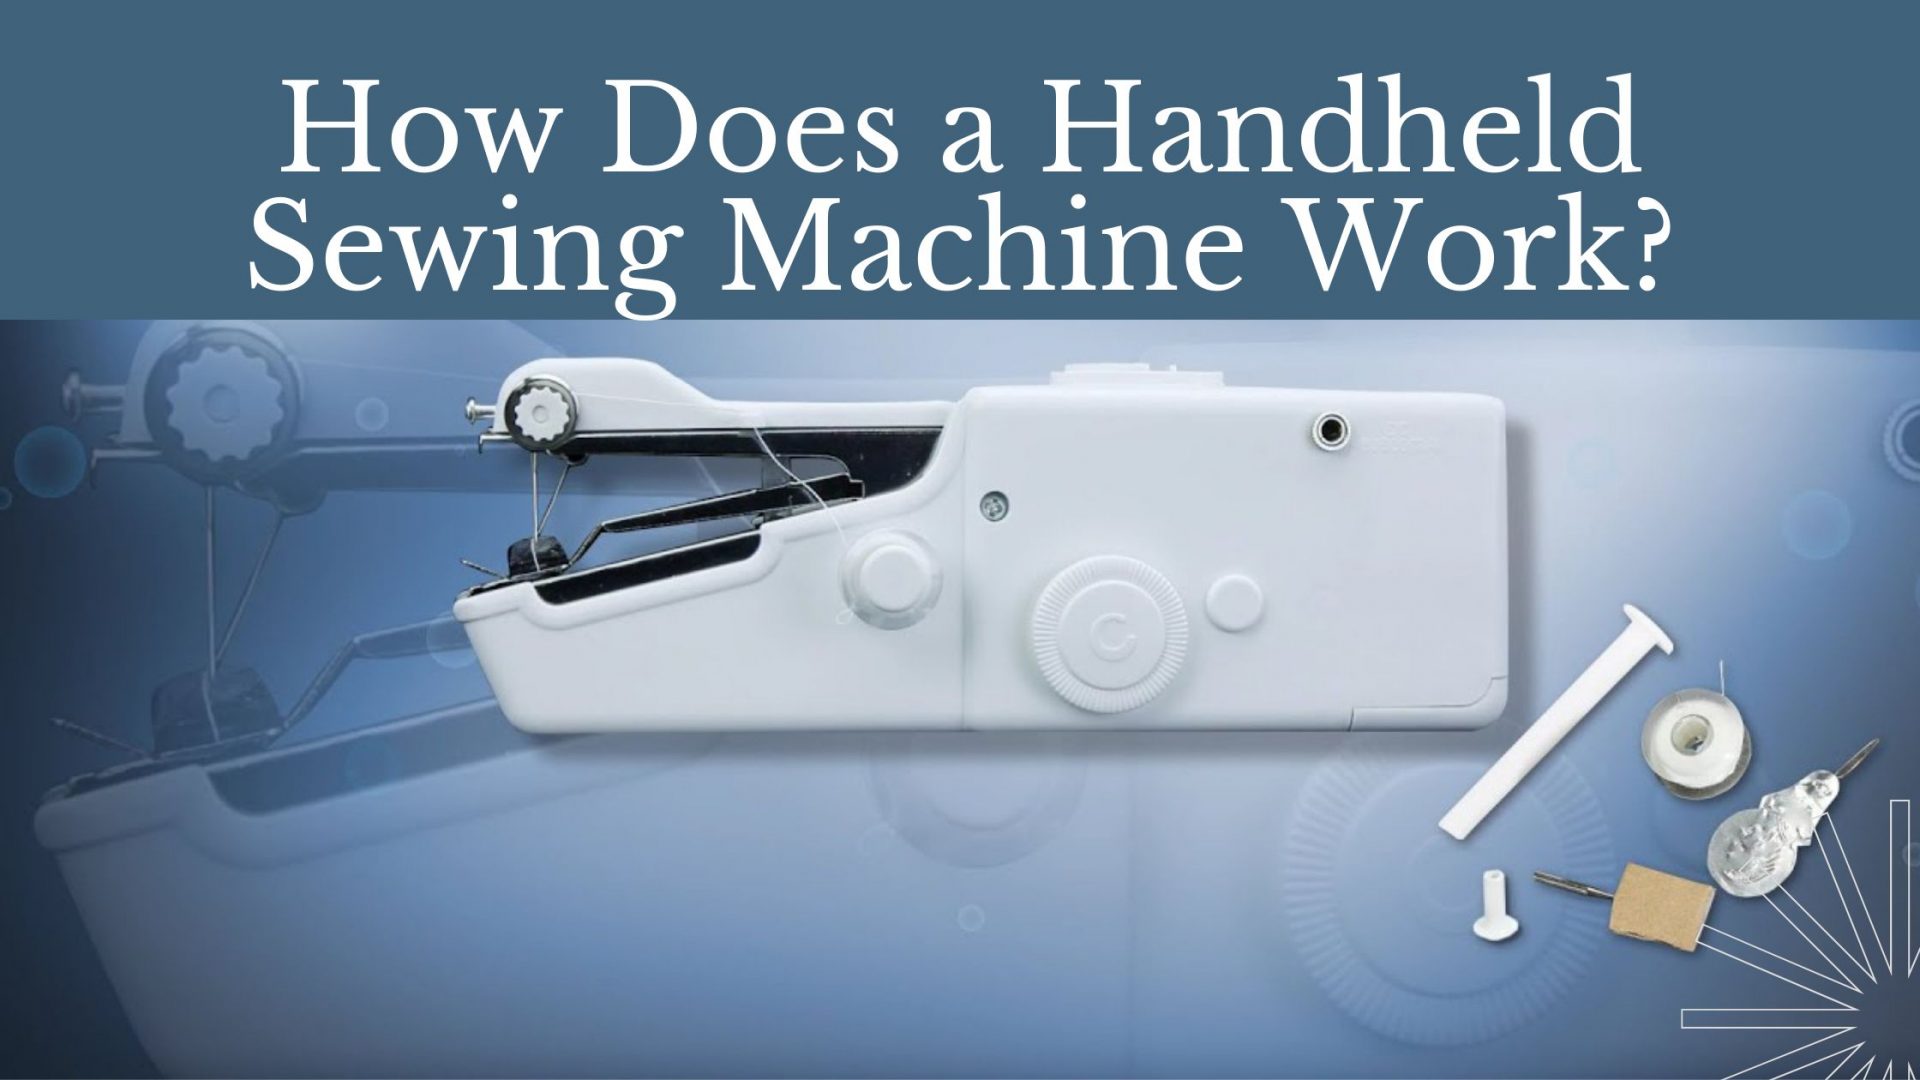 How Does a Handheld Sewing Machine Work